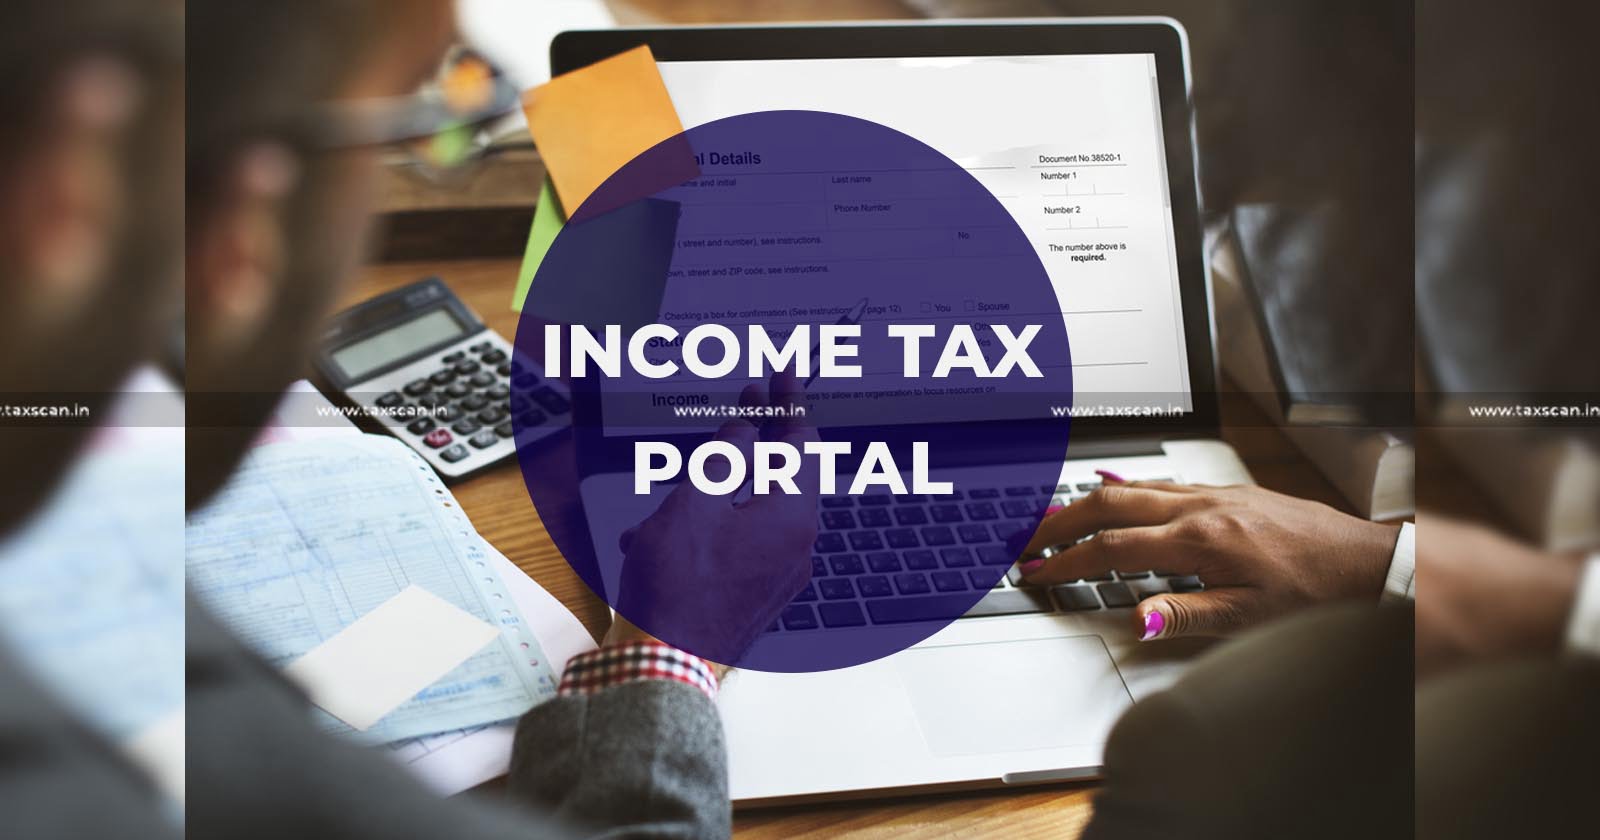 Punjab and Haryana High Court - Income Tax - Income Tax Department - Income Tax Portal - taxscan